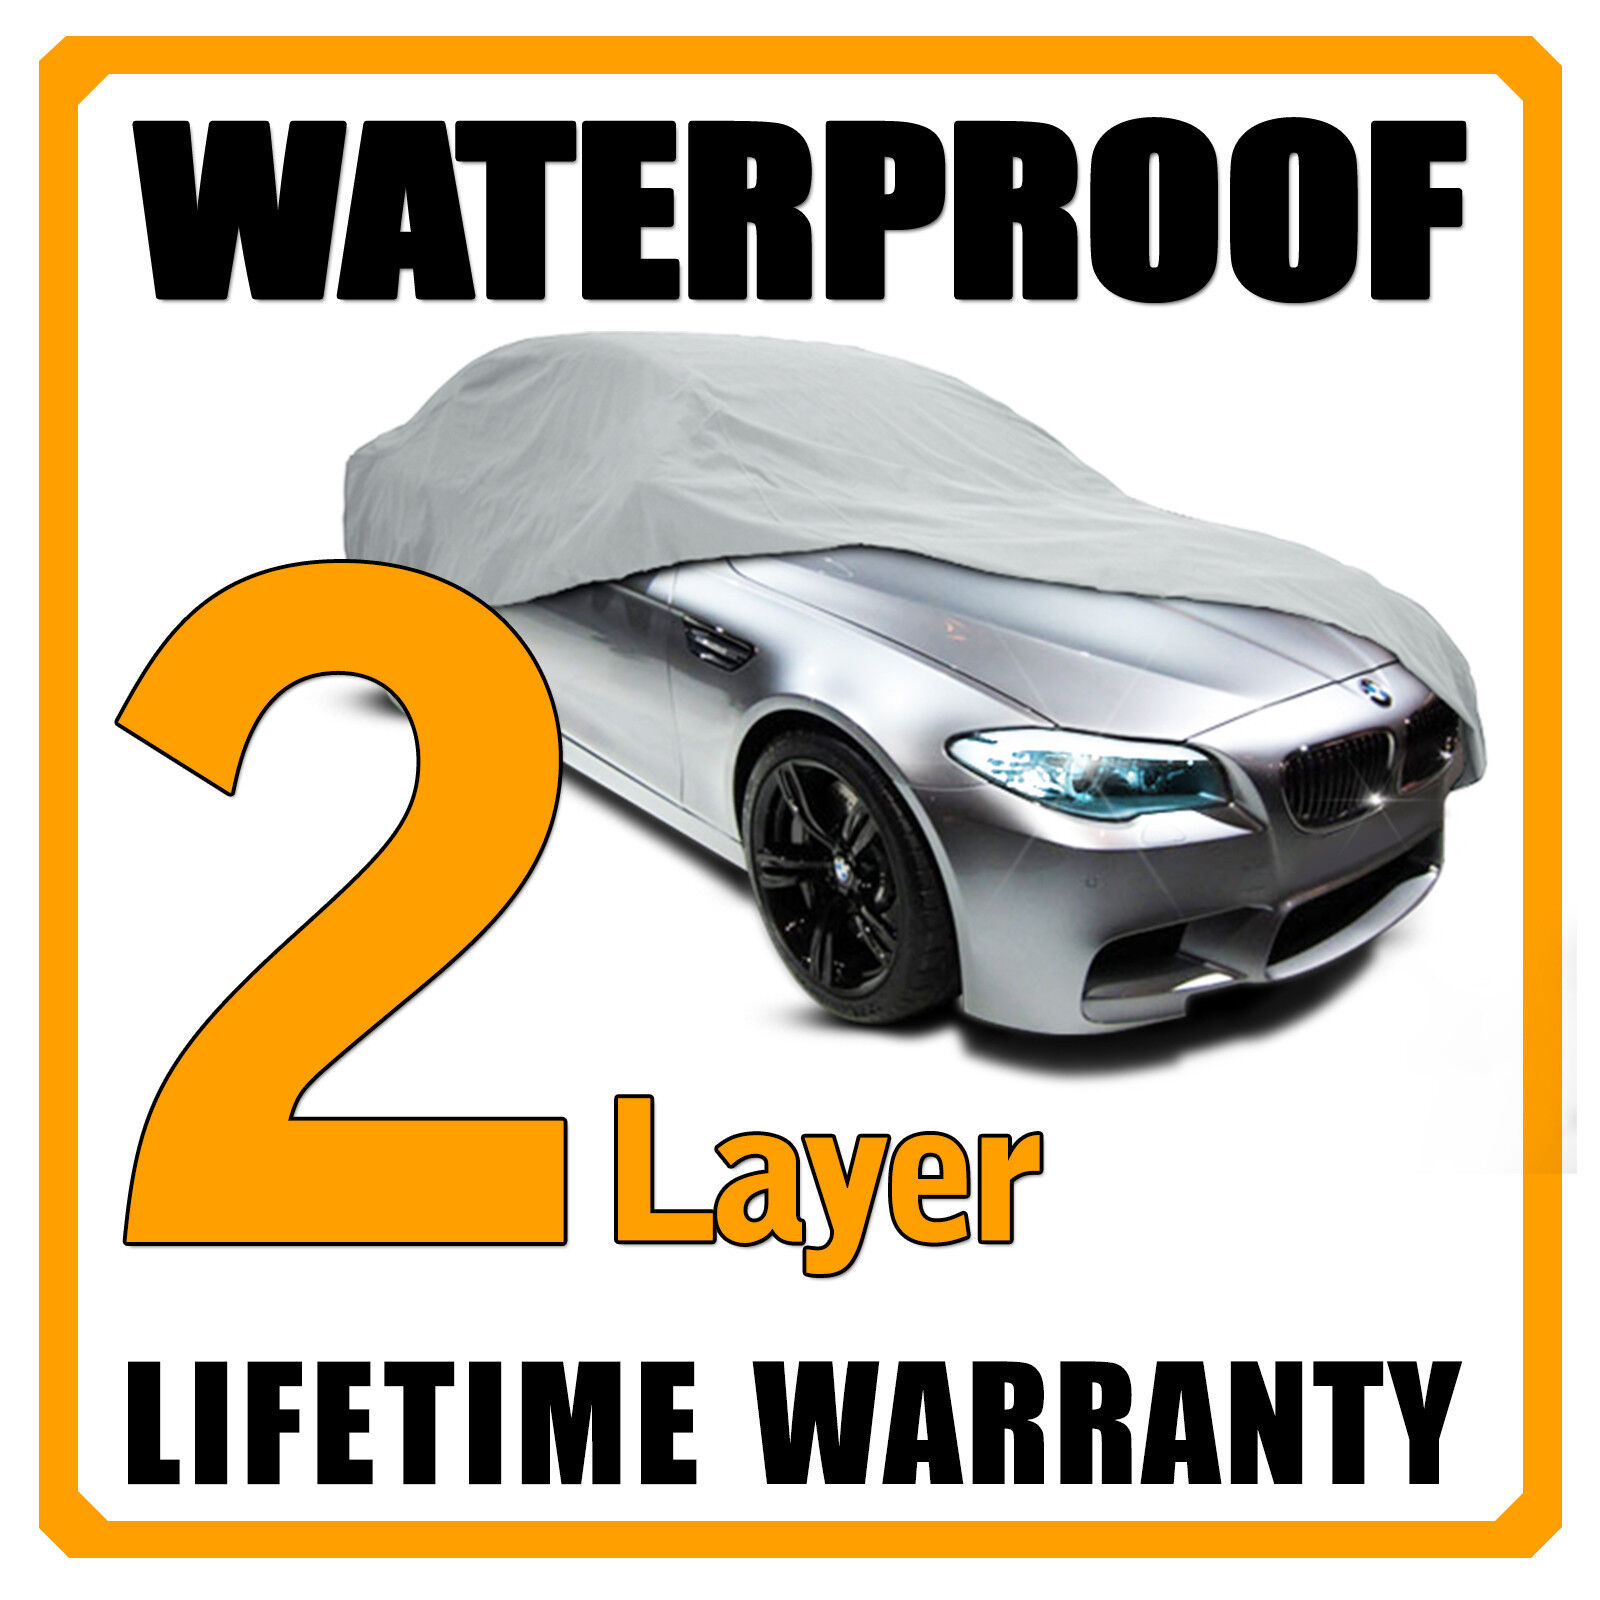 2 Layer Car Cover Breathable Waterproof Layers Outdoor Indoor Fleece Lining Fis